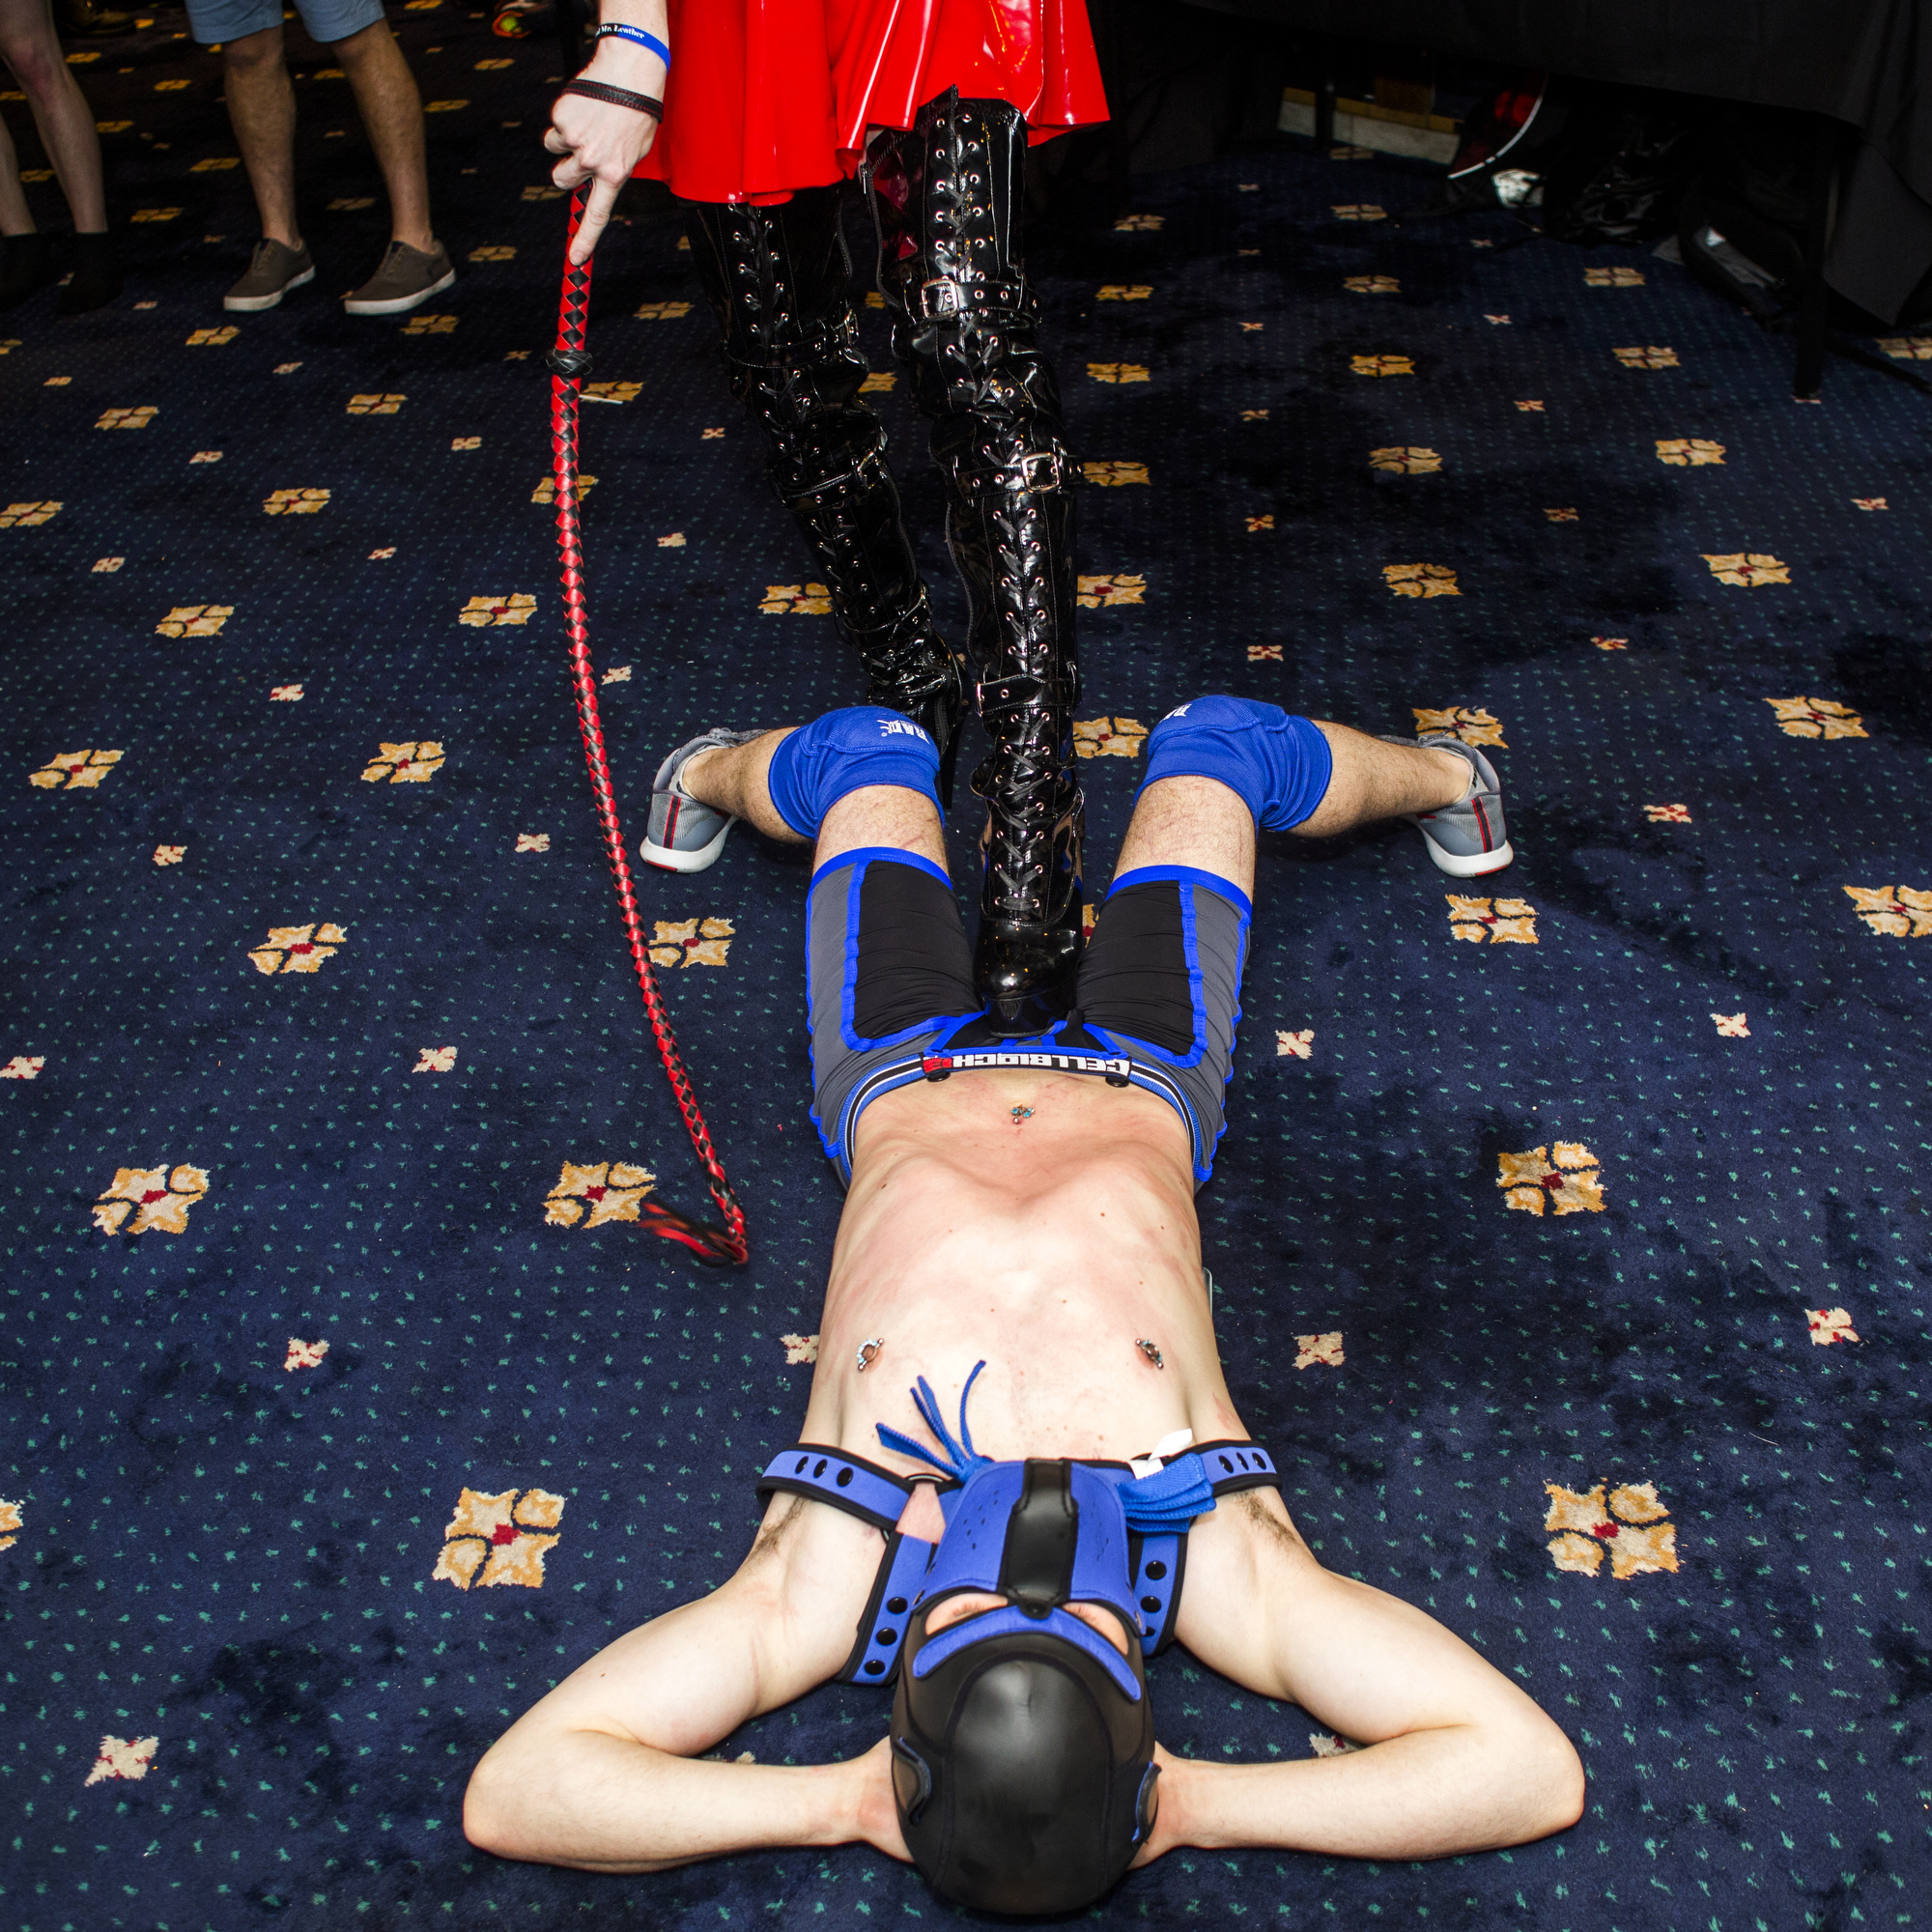  Sam Brinton, of D.C., top, whips a friend at The 40th Annual International Mister Leather Competition held in Chicago on Friday, May 25, 2018.  